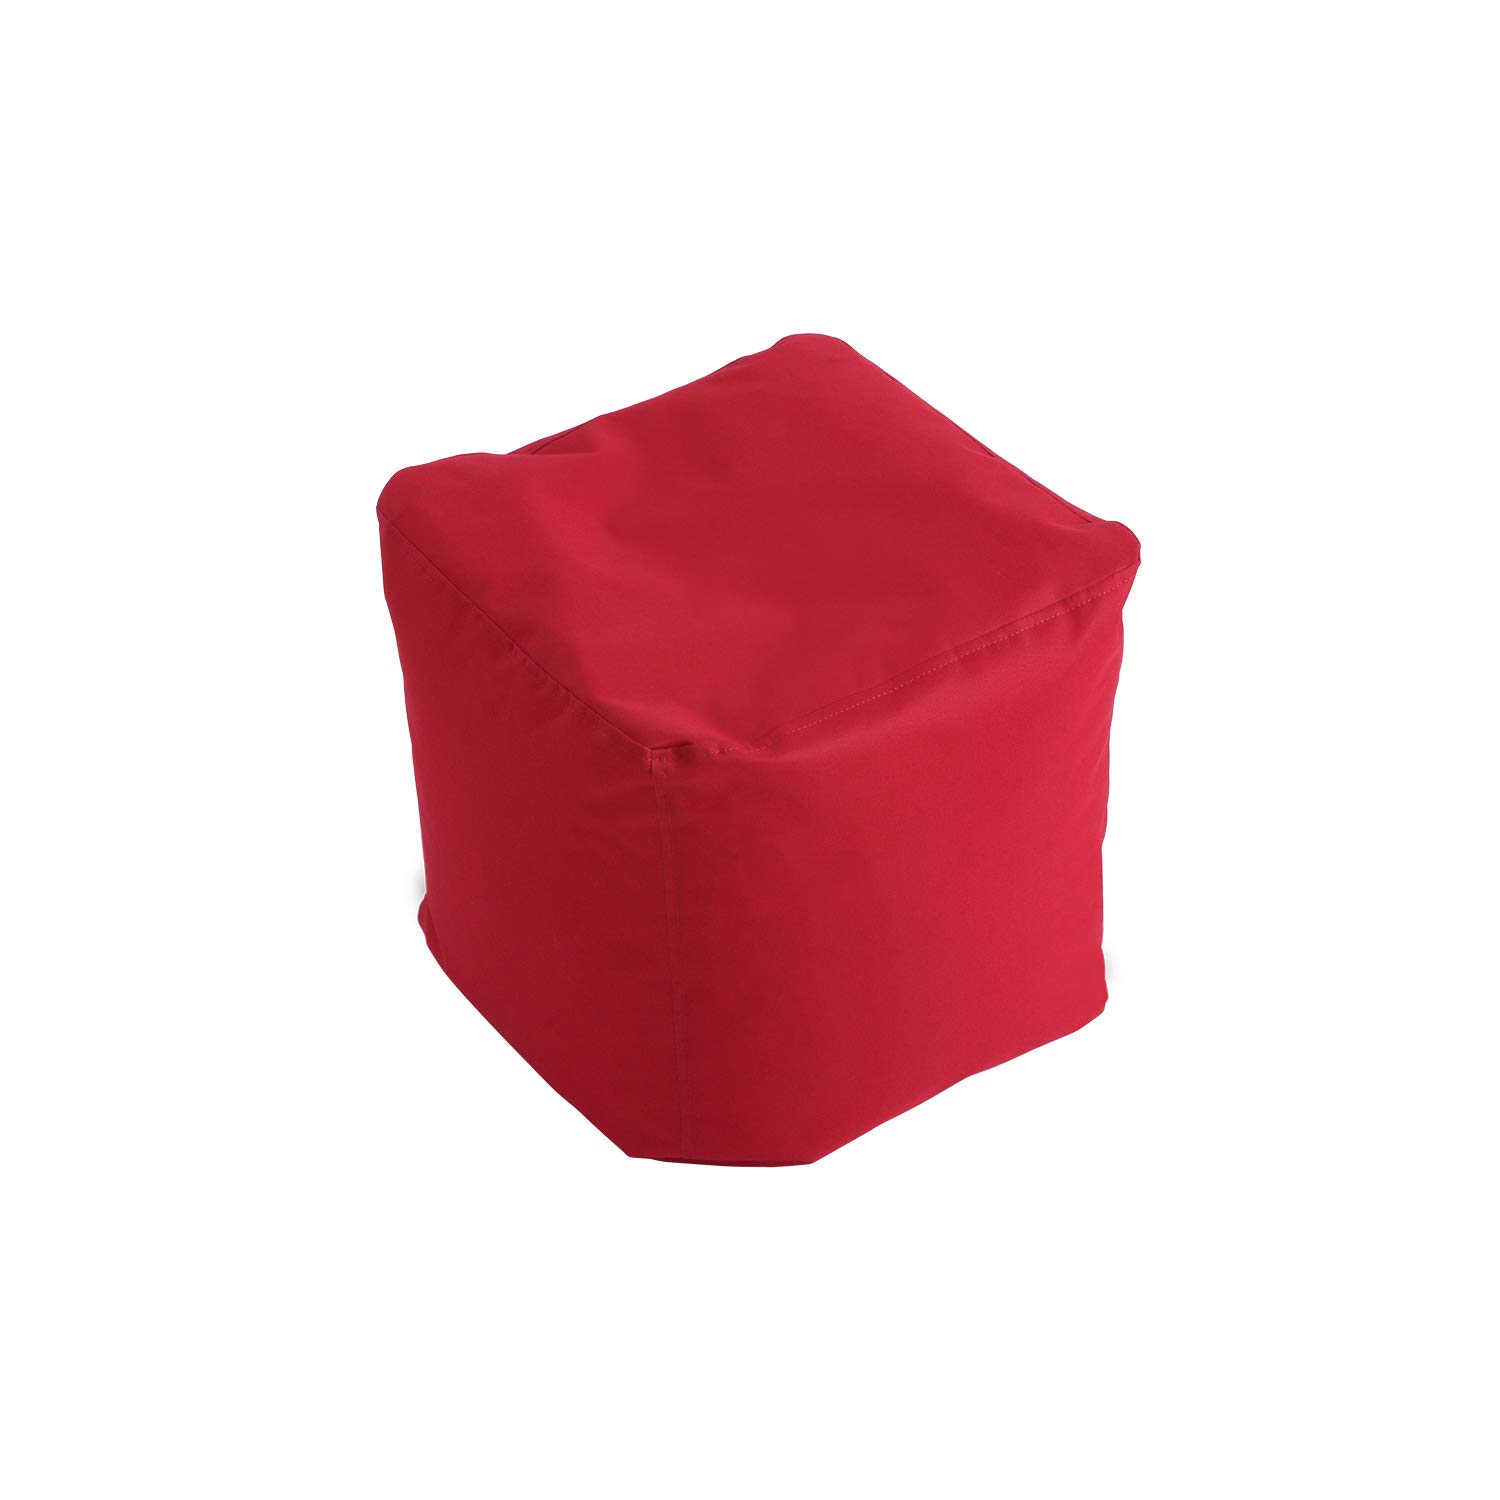 Knorr-Baby 440205 Stool Square M Colour Red